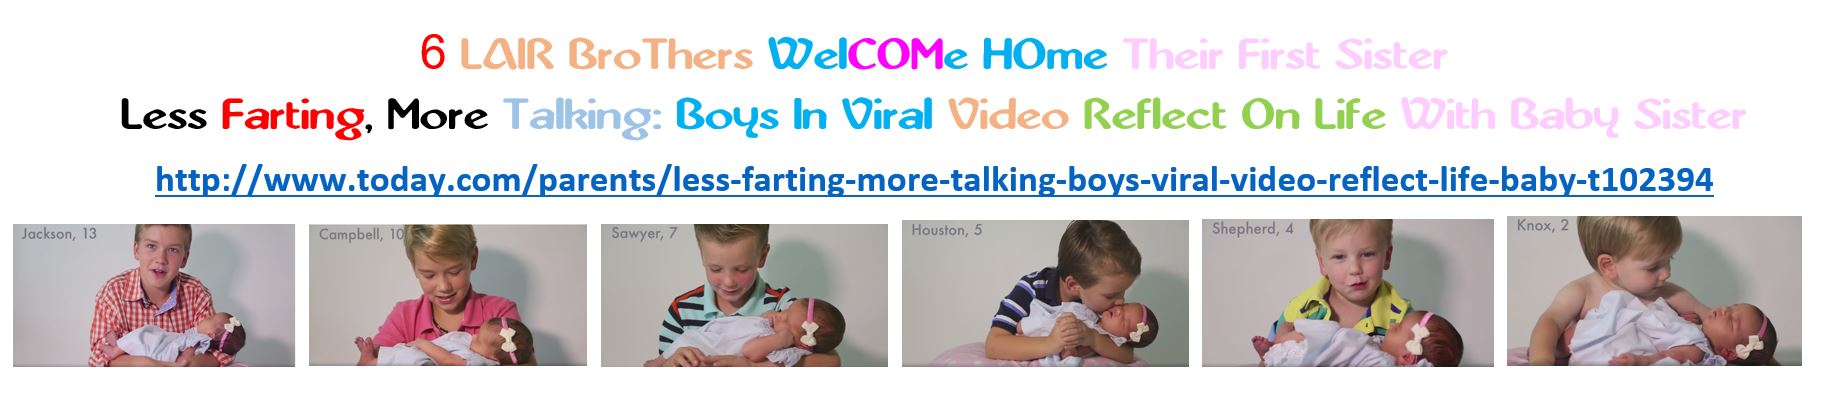 4-less-farting-more-talking-boys-in-viral-video-reflect-on-life-with-baby-sister